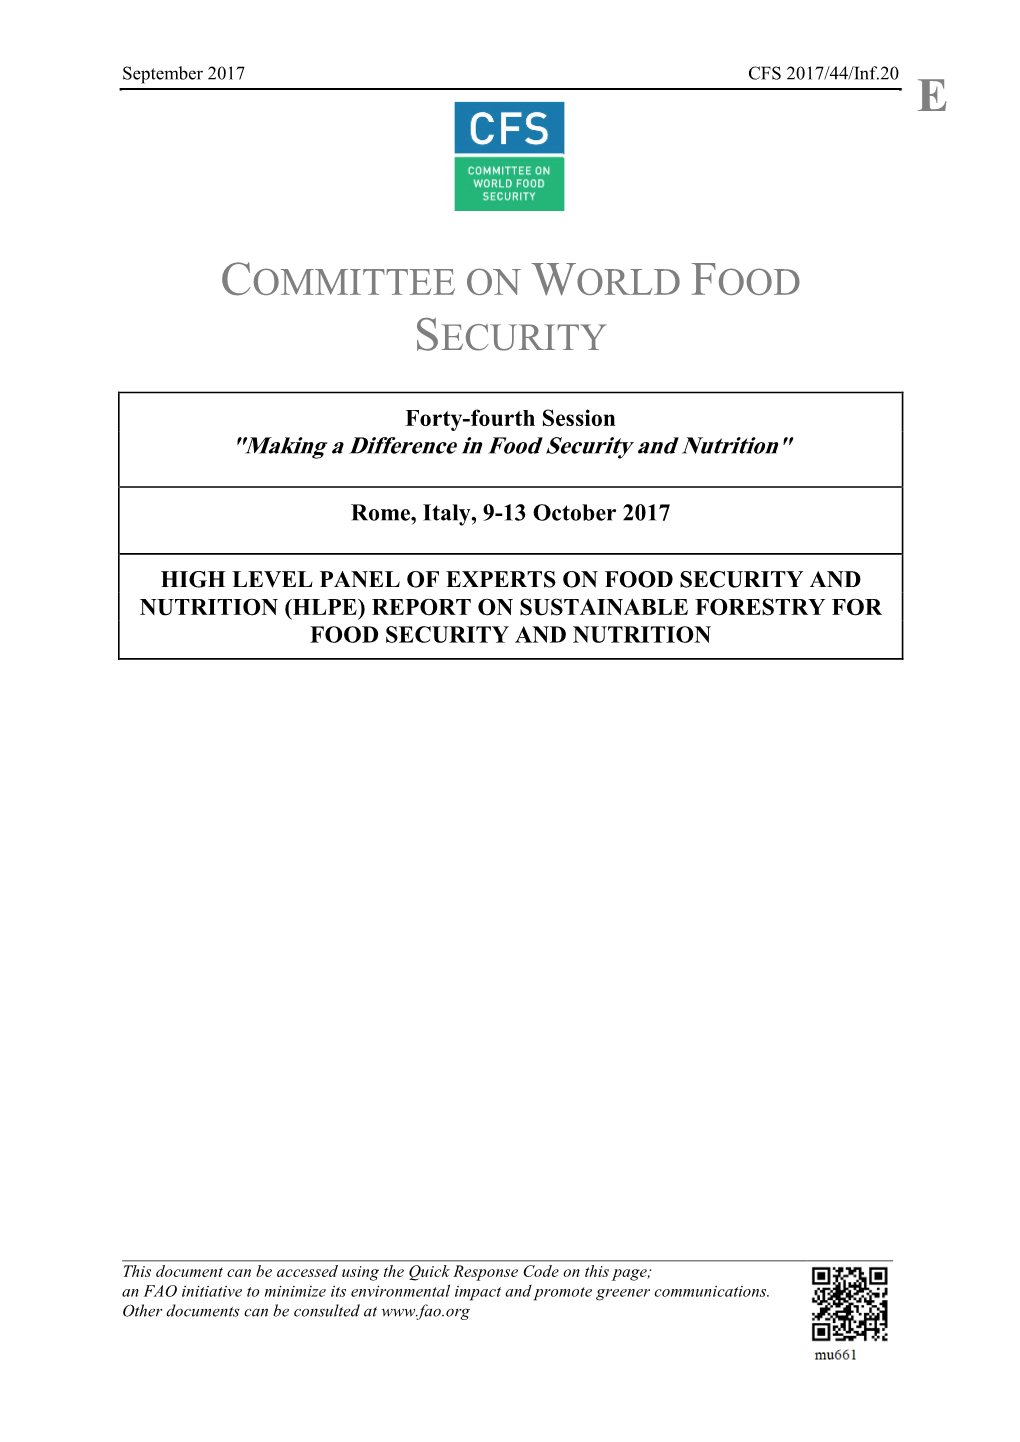 High Level Panel of Experts on Food Security and Nutrition (Hlpe) Report on Sustainable Forestry for Food Security and Nutrition